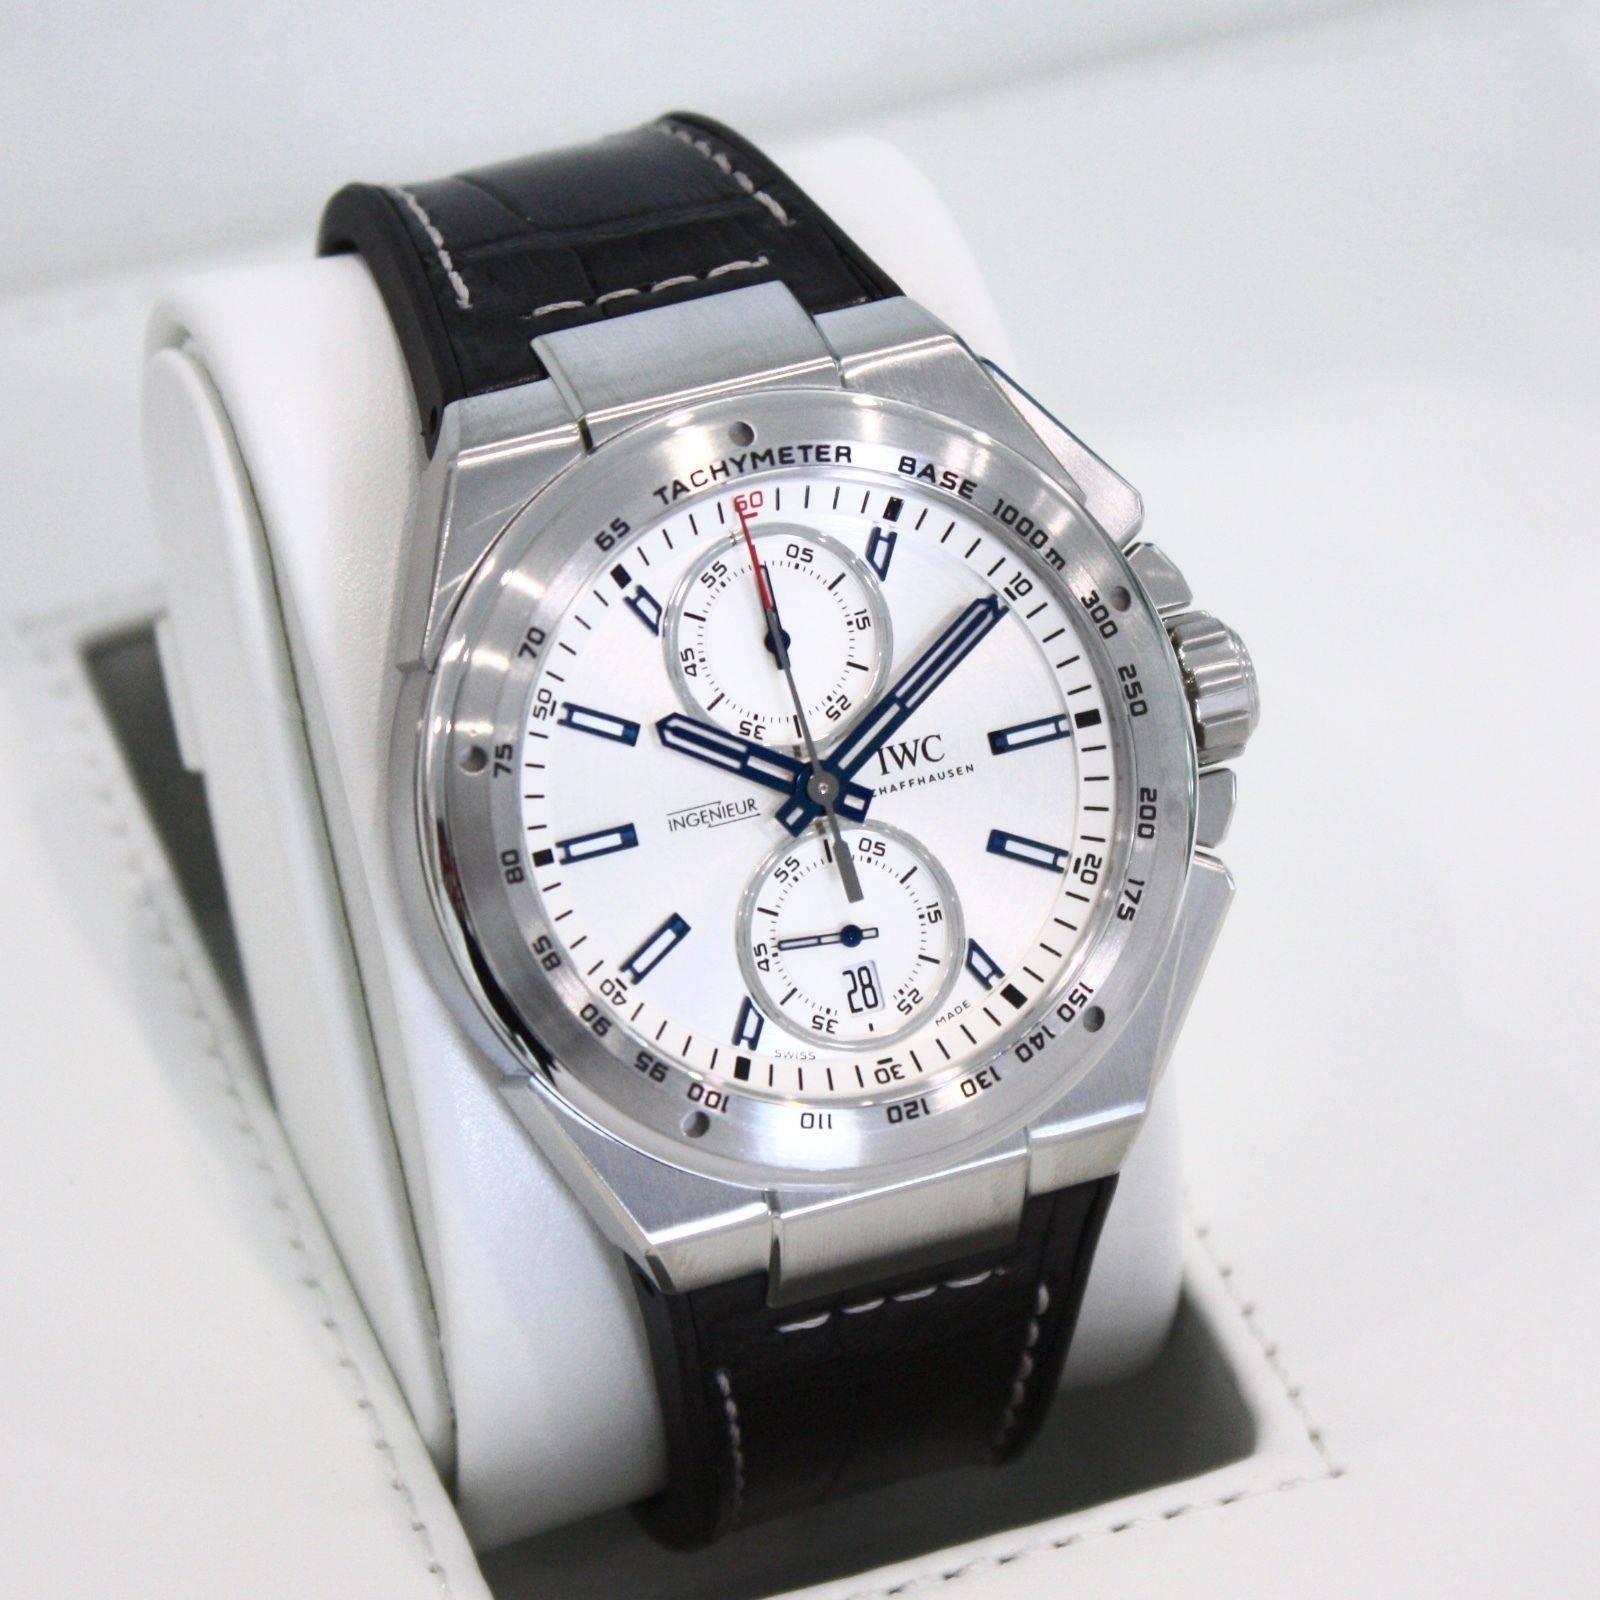 Brand Name: IWC
Style Number: IW378509
Also Called: 378509, 3785-09, IW3785-09
Series: Ingenieur Chronograph Racer
Gender: Men's
Case Material: Stainless Steel
Dial Color	: Silver w/ Blue Accents 
Movement: Automatic
Engine: IWC Caliber